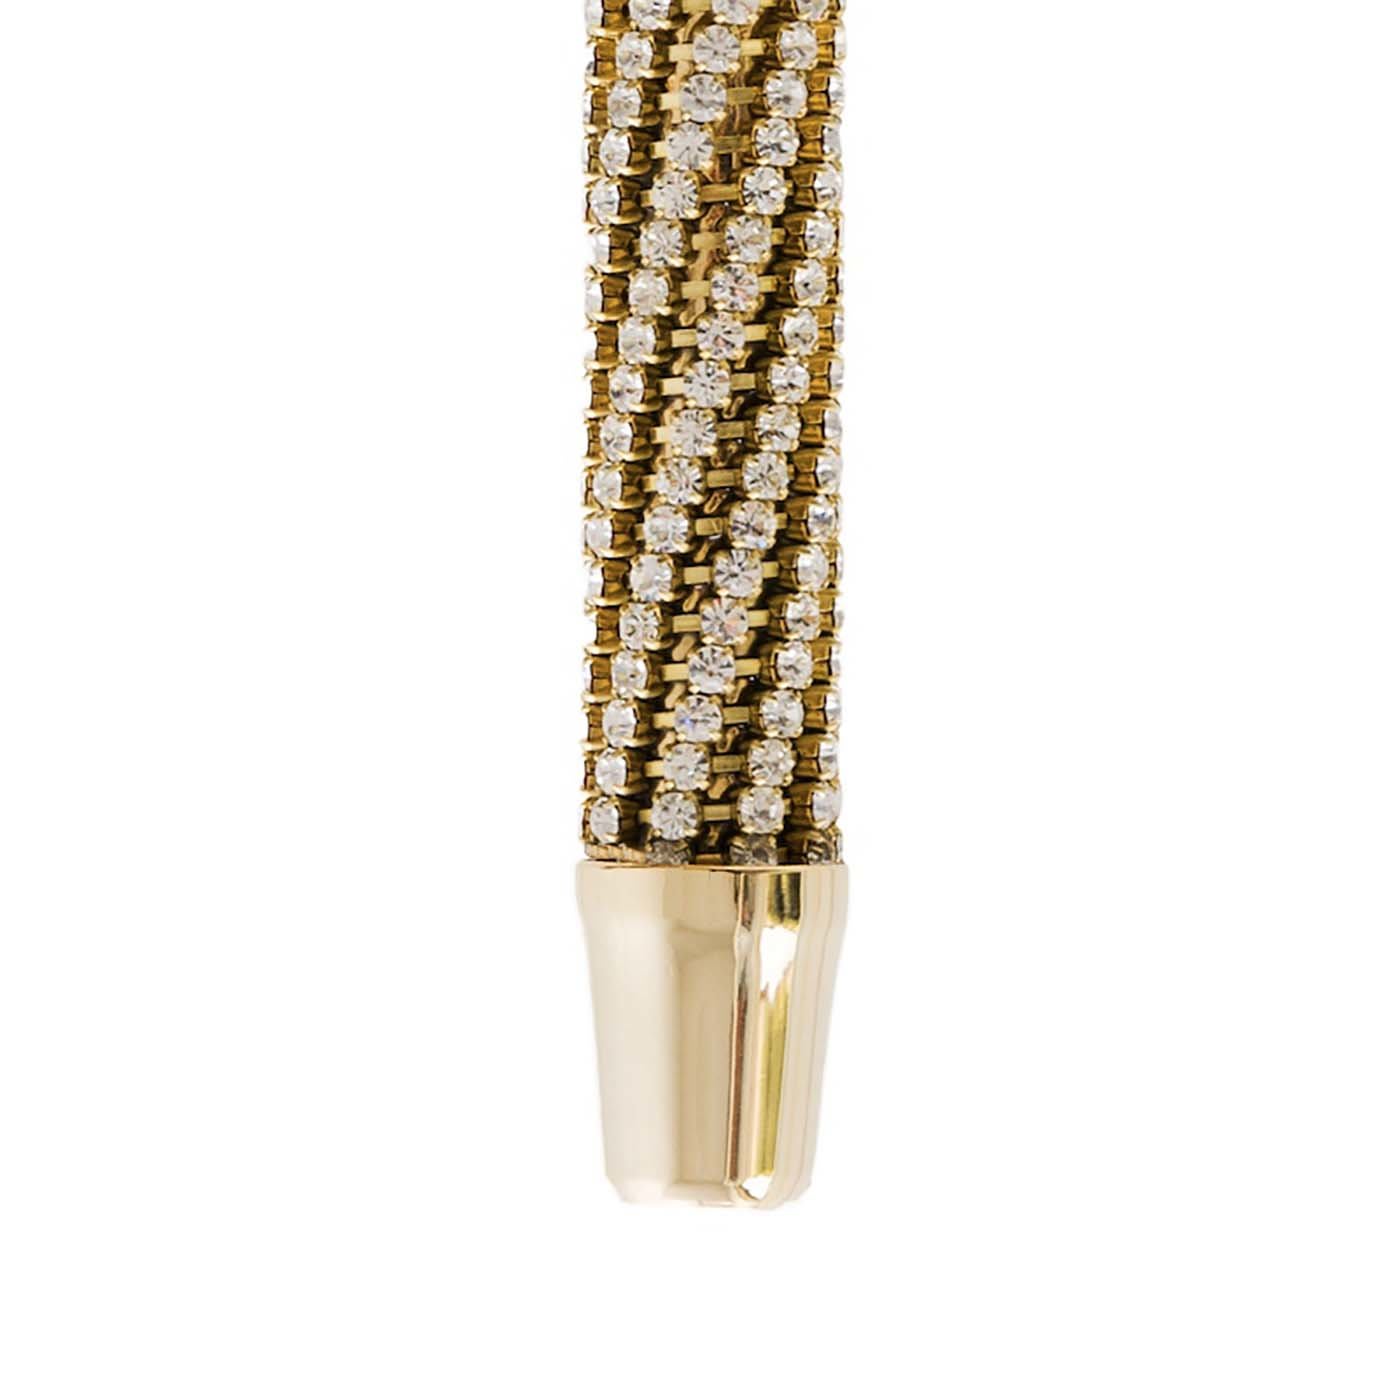 Luxury Cane with Crystals from Swarovski® - Pasotti